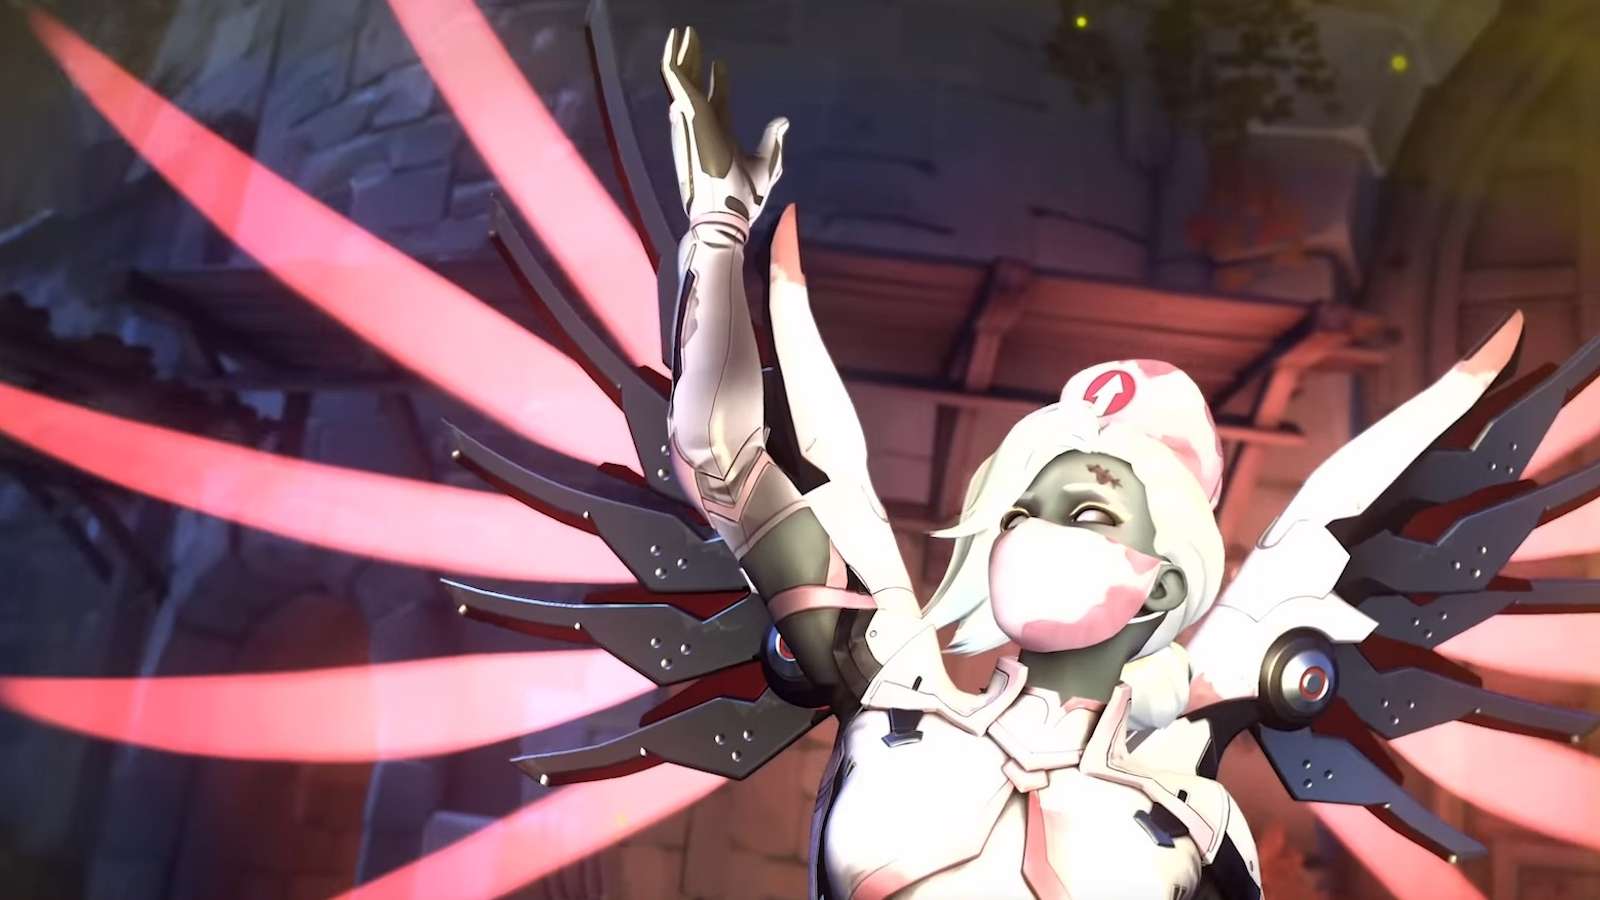 New Zombie Nurse skin for Mercy that has yet to be released in Overwatch 2 despite Halloween event ending.